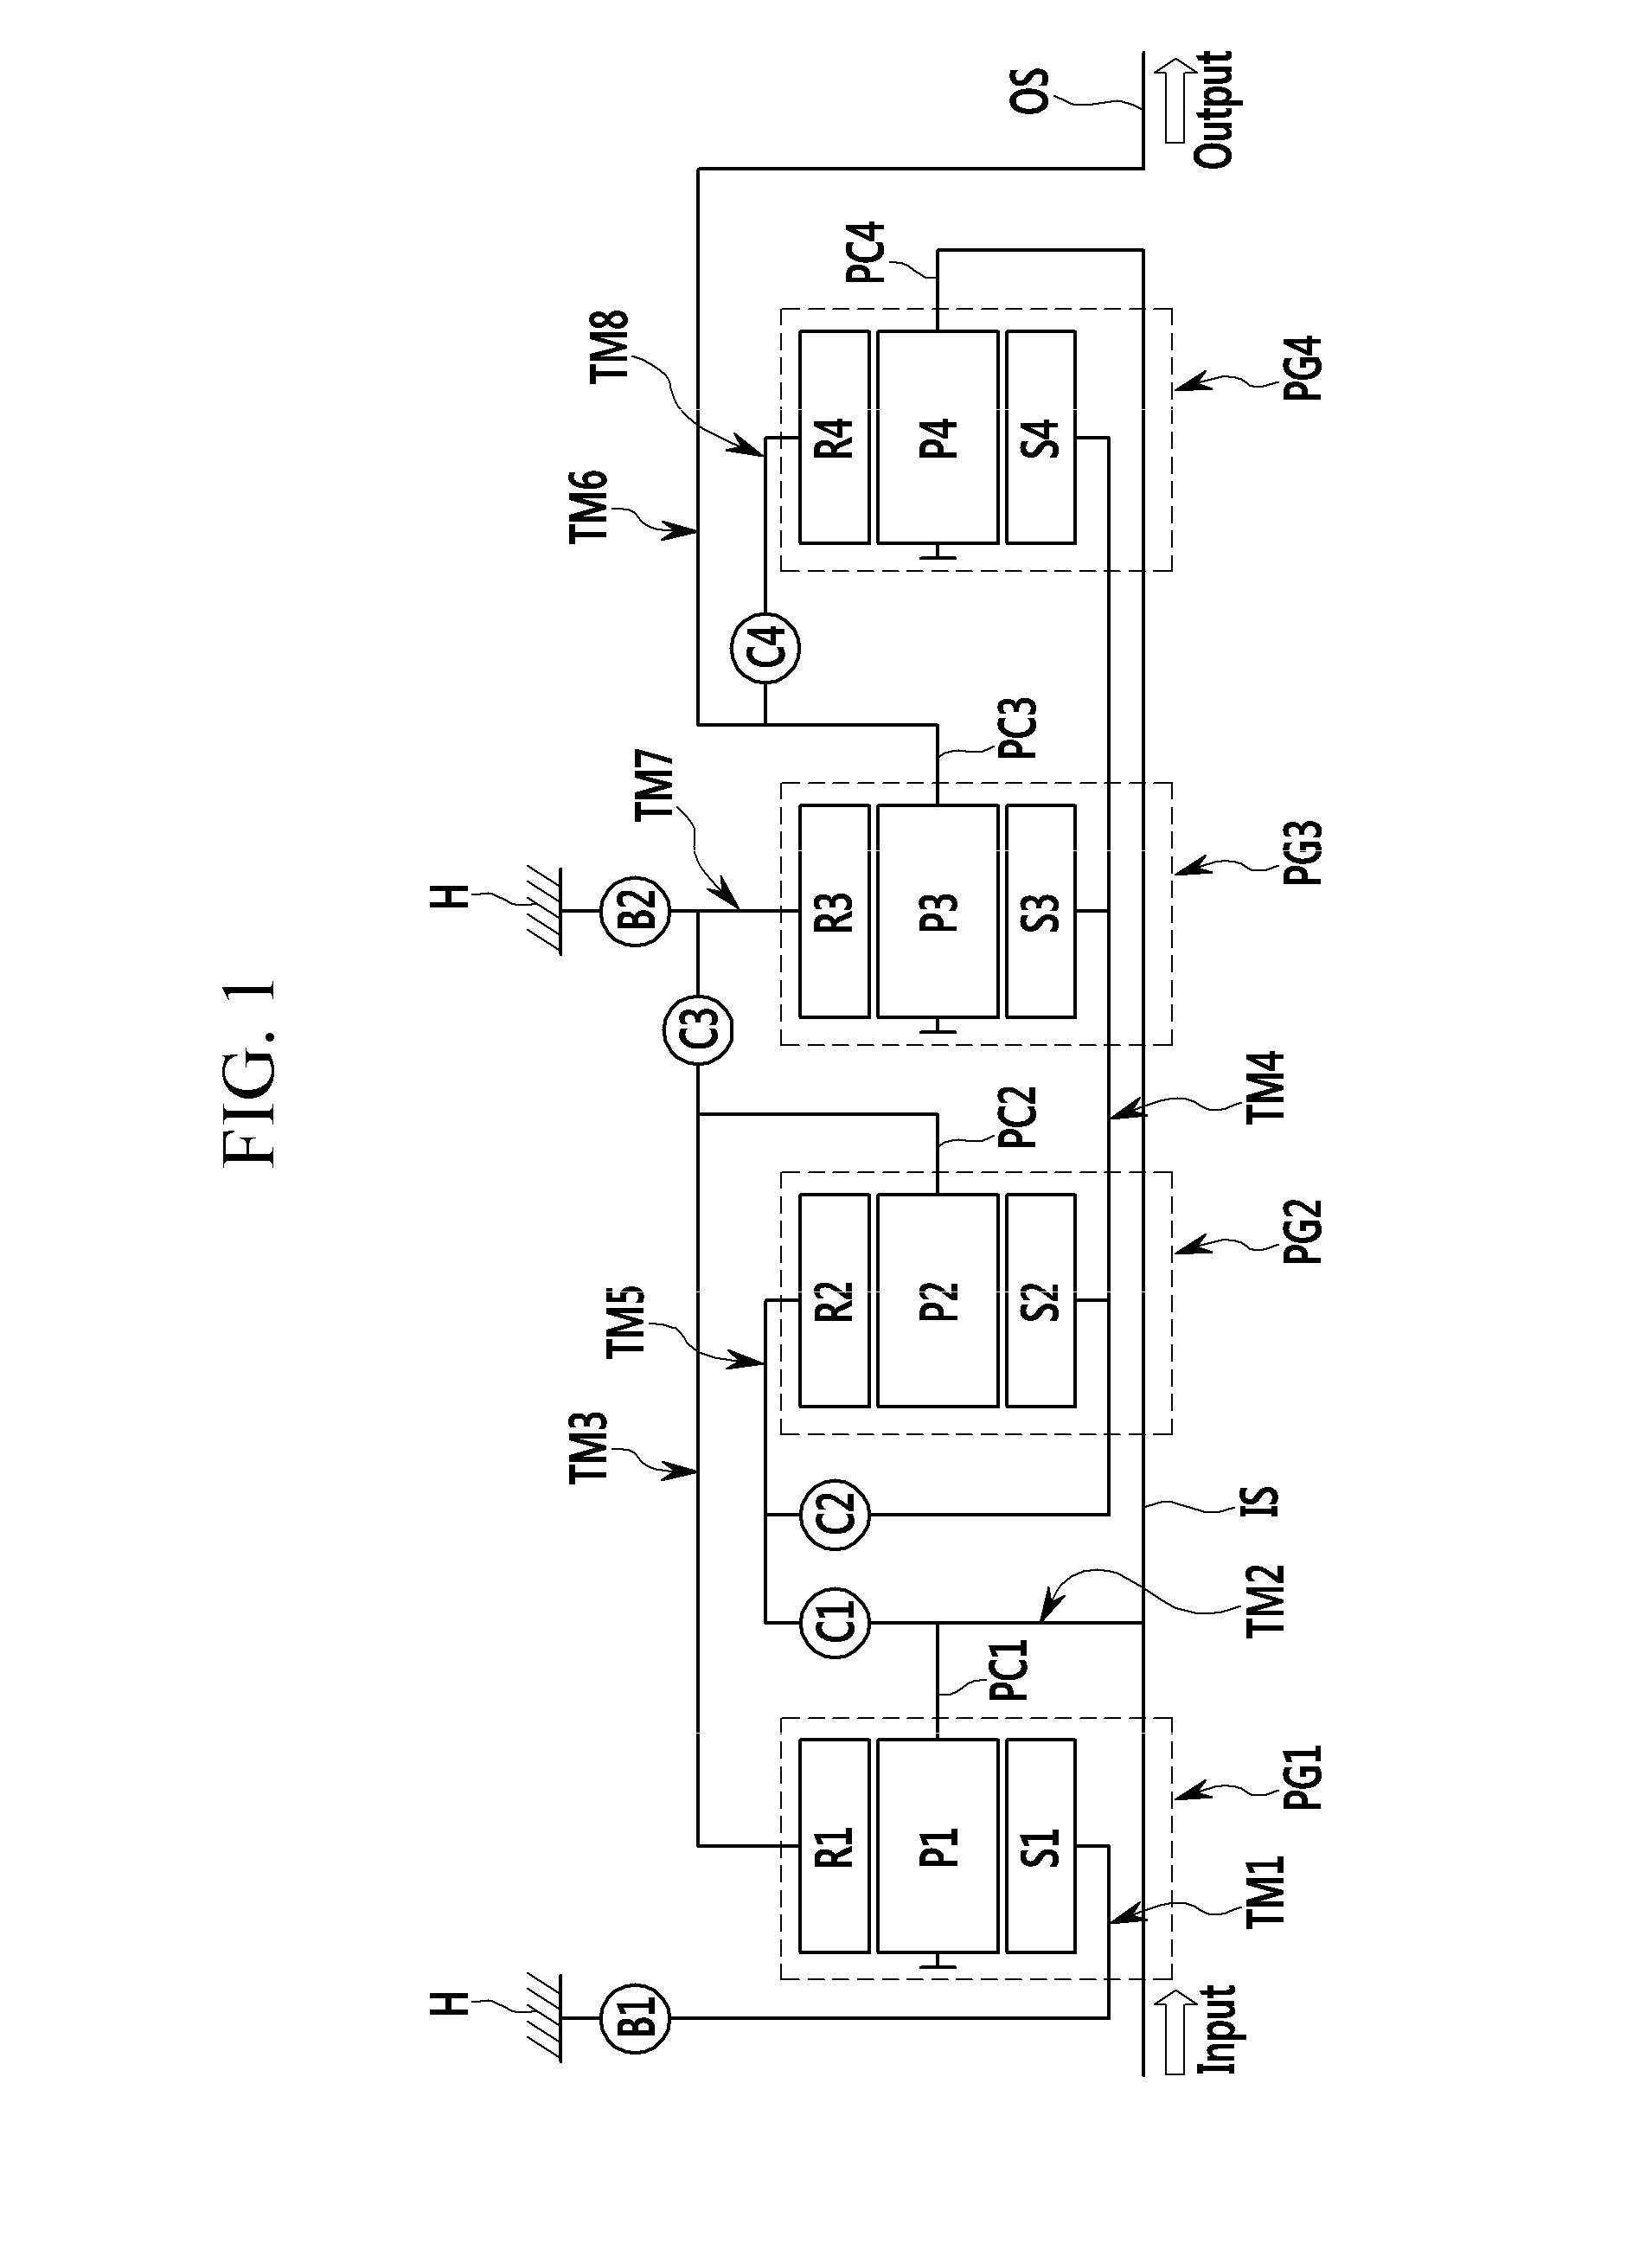 Planetary gear train of automatic transmission for vehicle